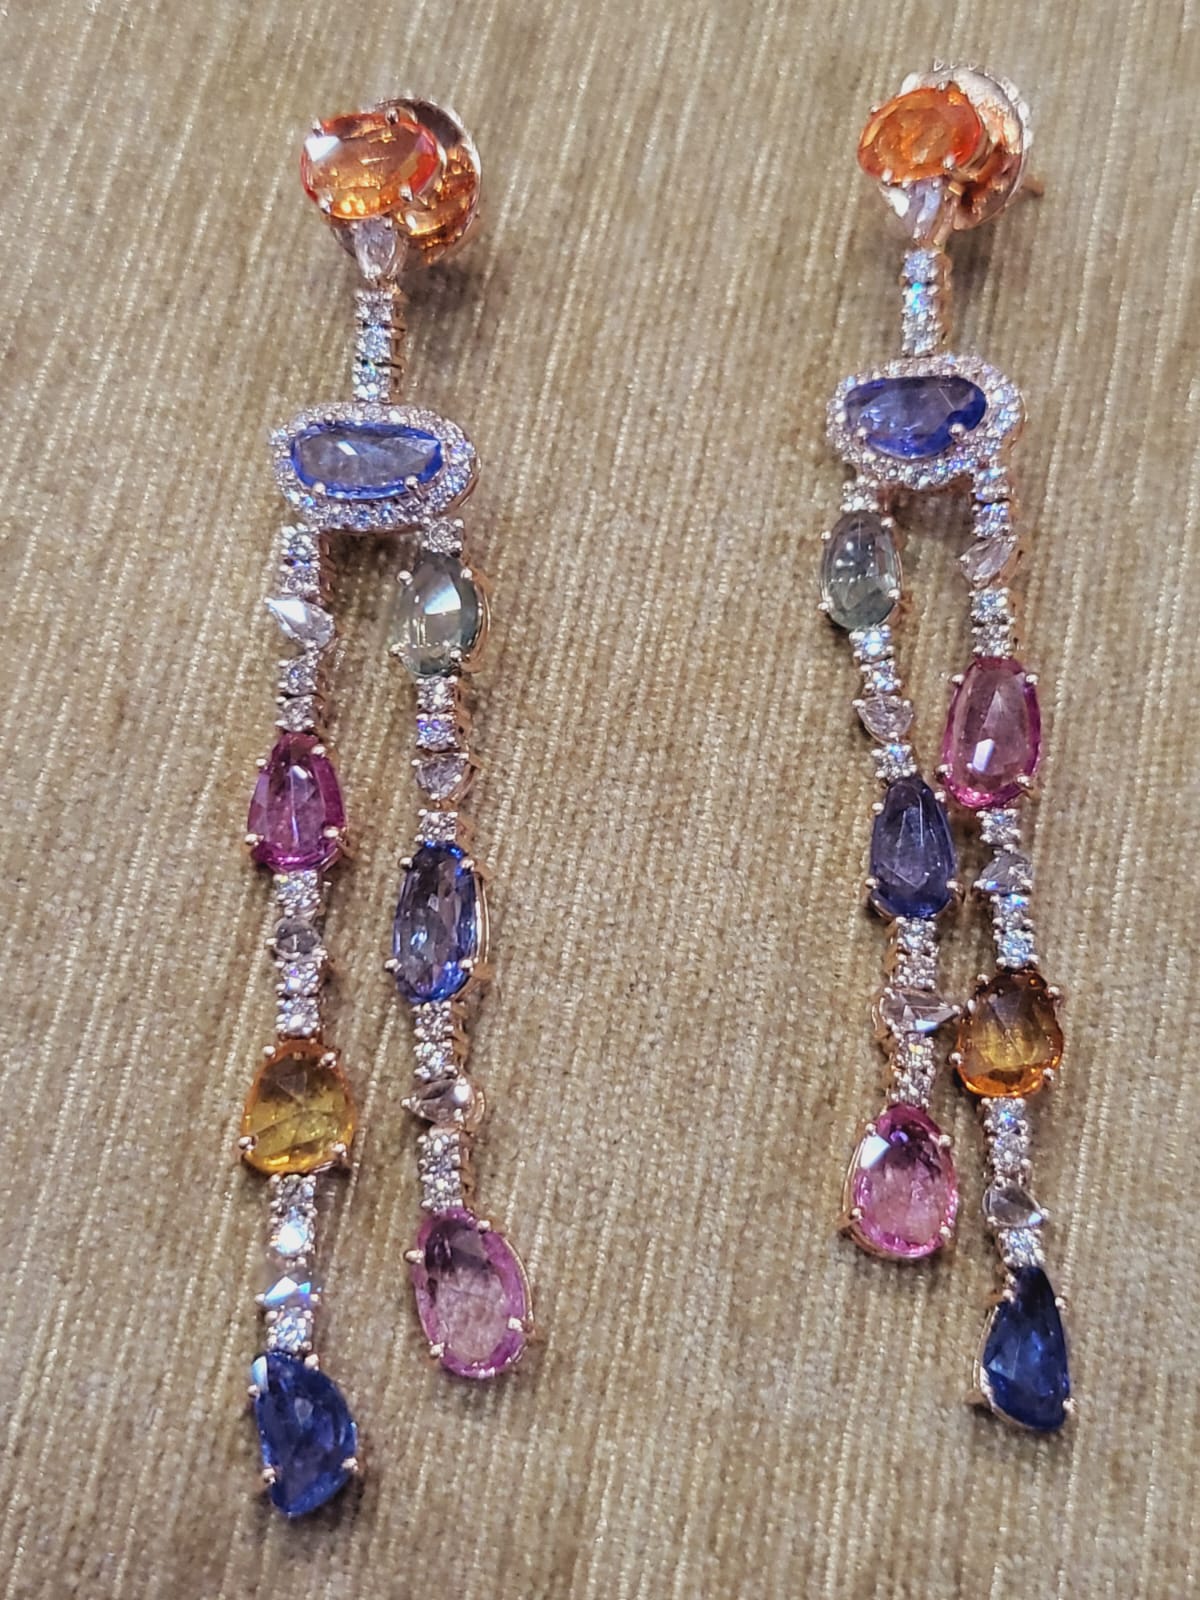 A very chic and gorgeous Multi Sapphires Chandelier/ Dangle Earrings set in 18K Rose Gold & Diamonds. The weight of the Multi Sapphires is 12.37 carats. The Multi Sapphires are of Ceylon (Sri Lanka) origin. The combined Diamonds weight is 2.33